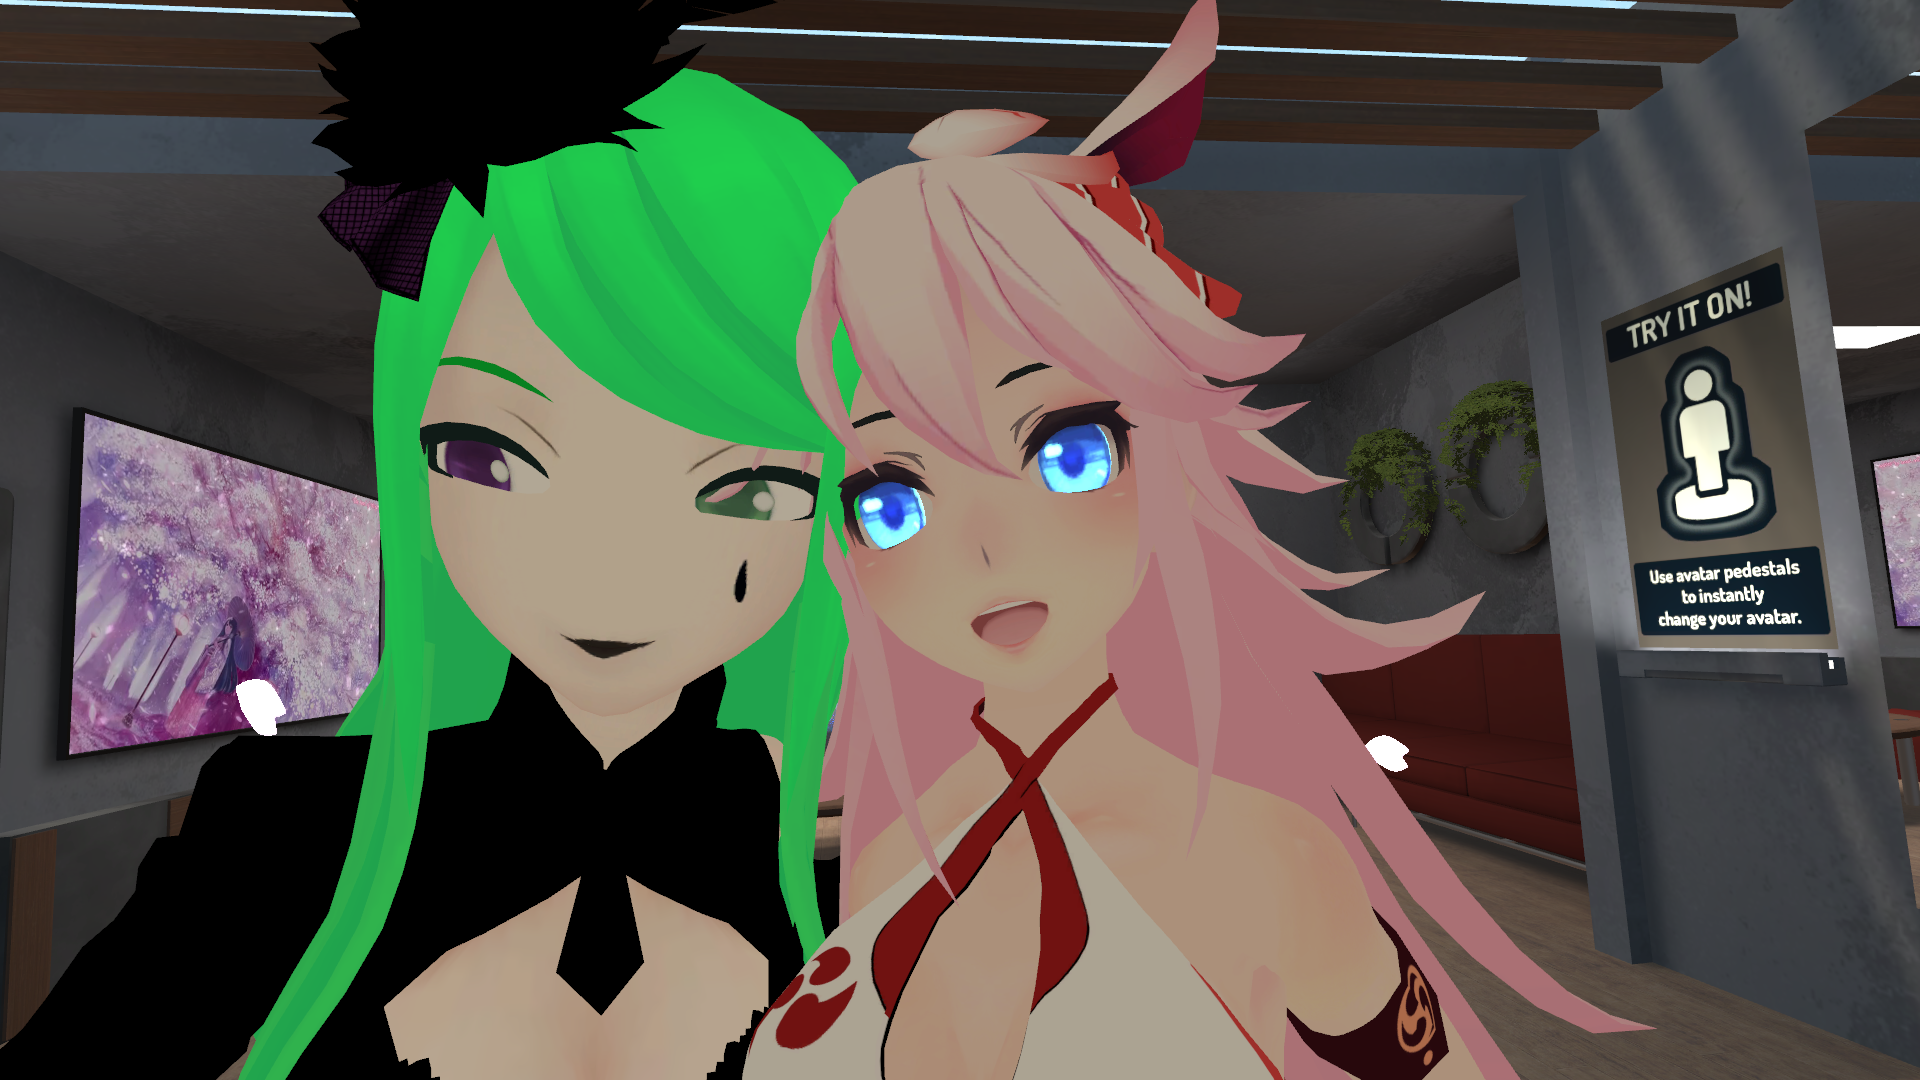 Goalie recomended sexy gets qwonk famous vrchat player